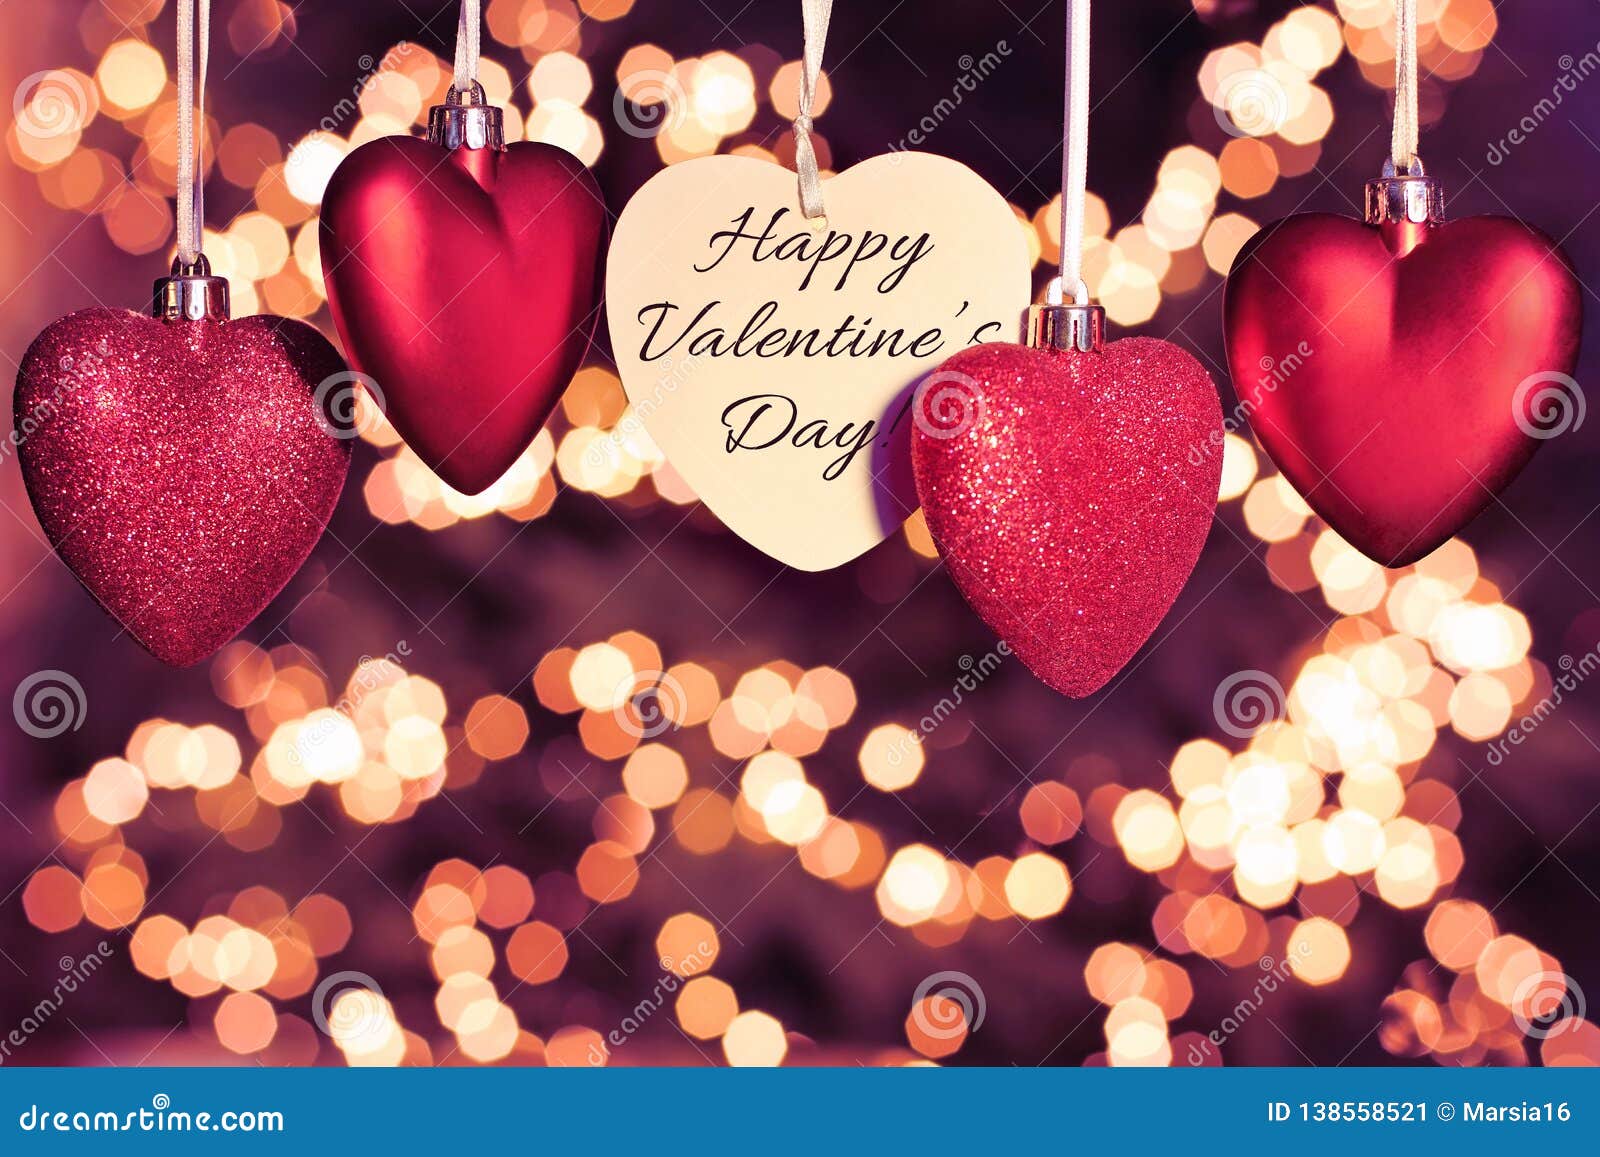 happy valentines day greeting card. beautiful red hearts